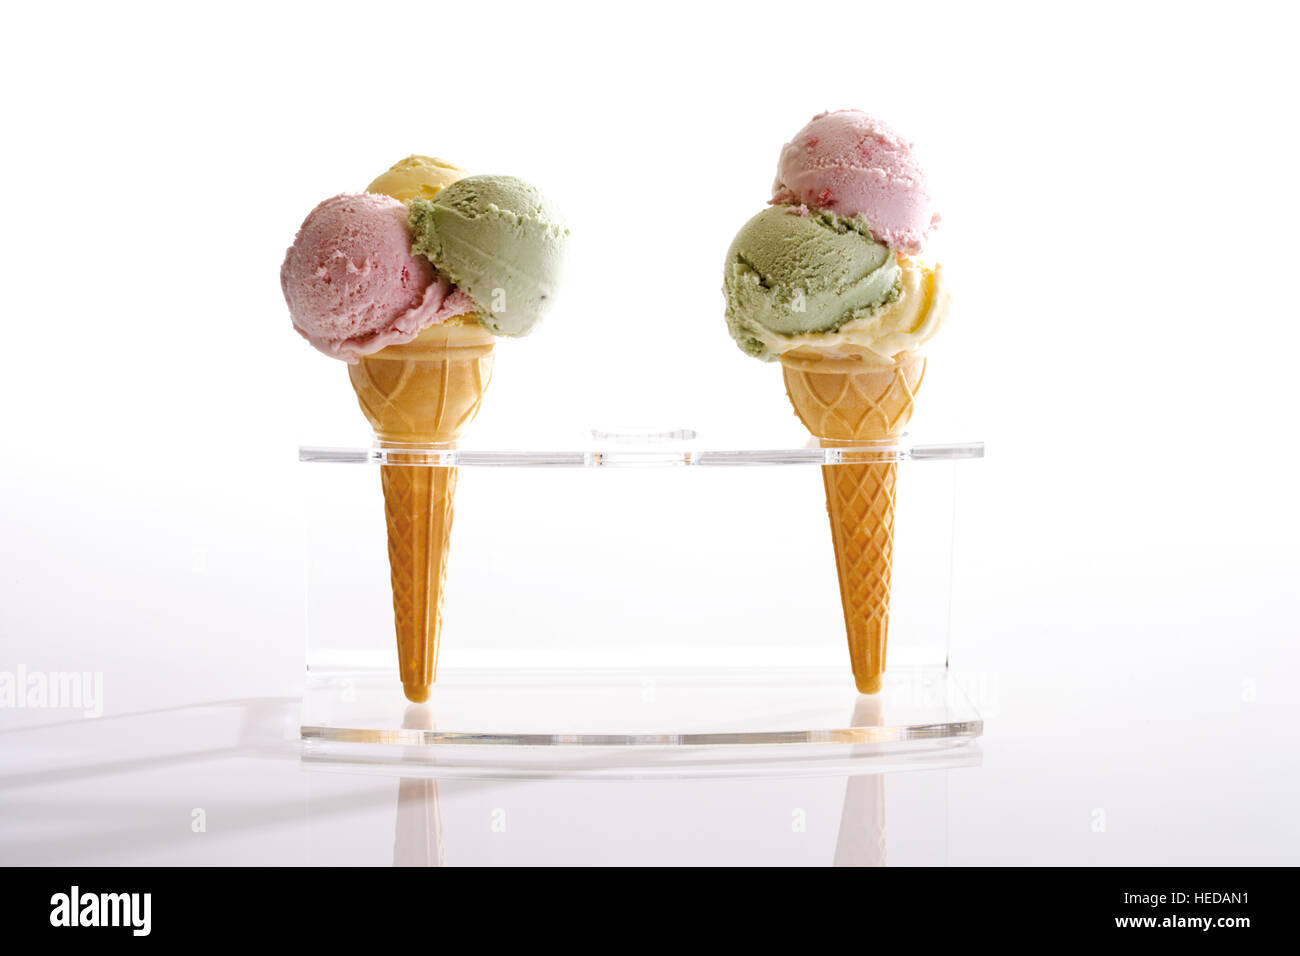 Two ice-cream cones in a stand Stock Photo